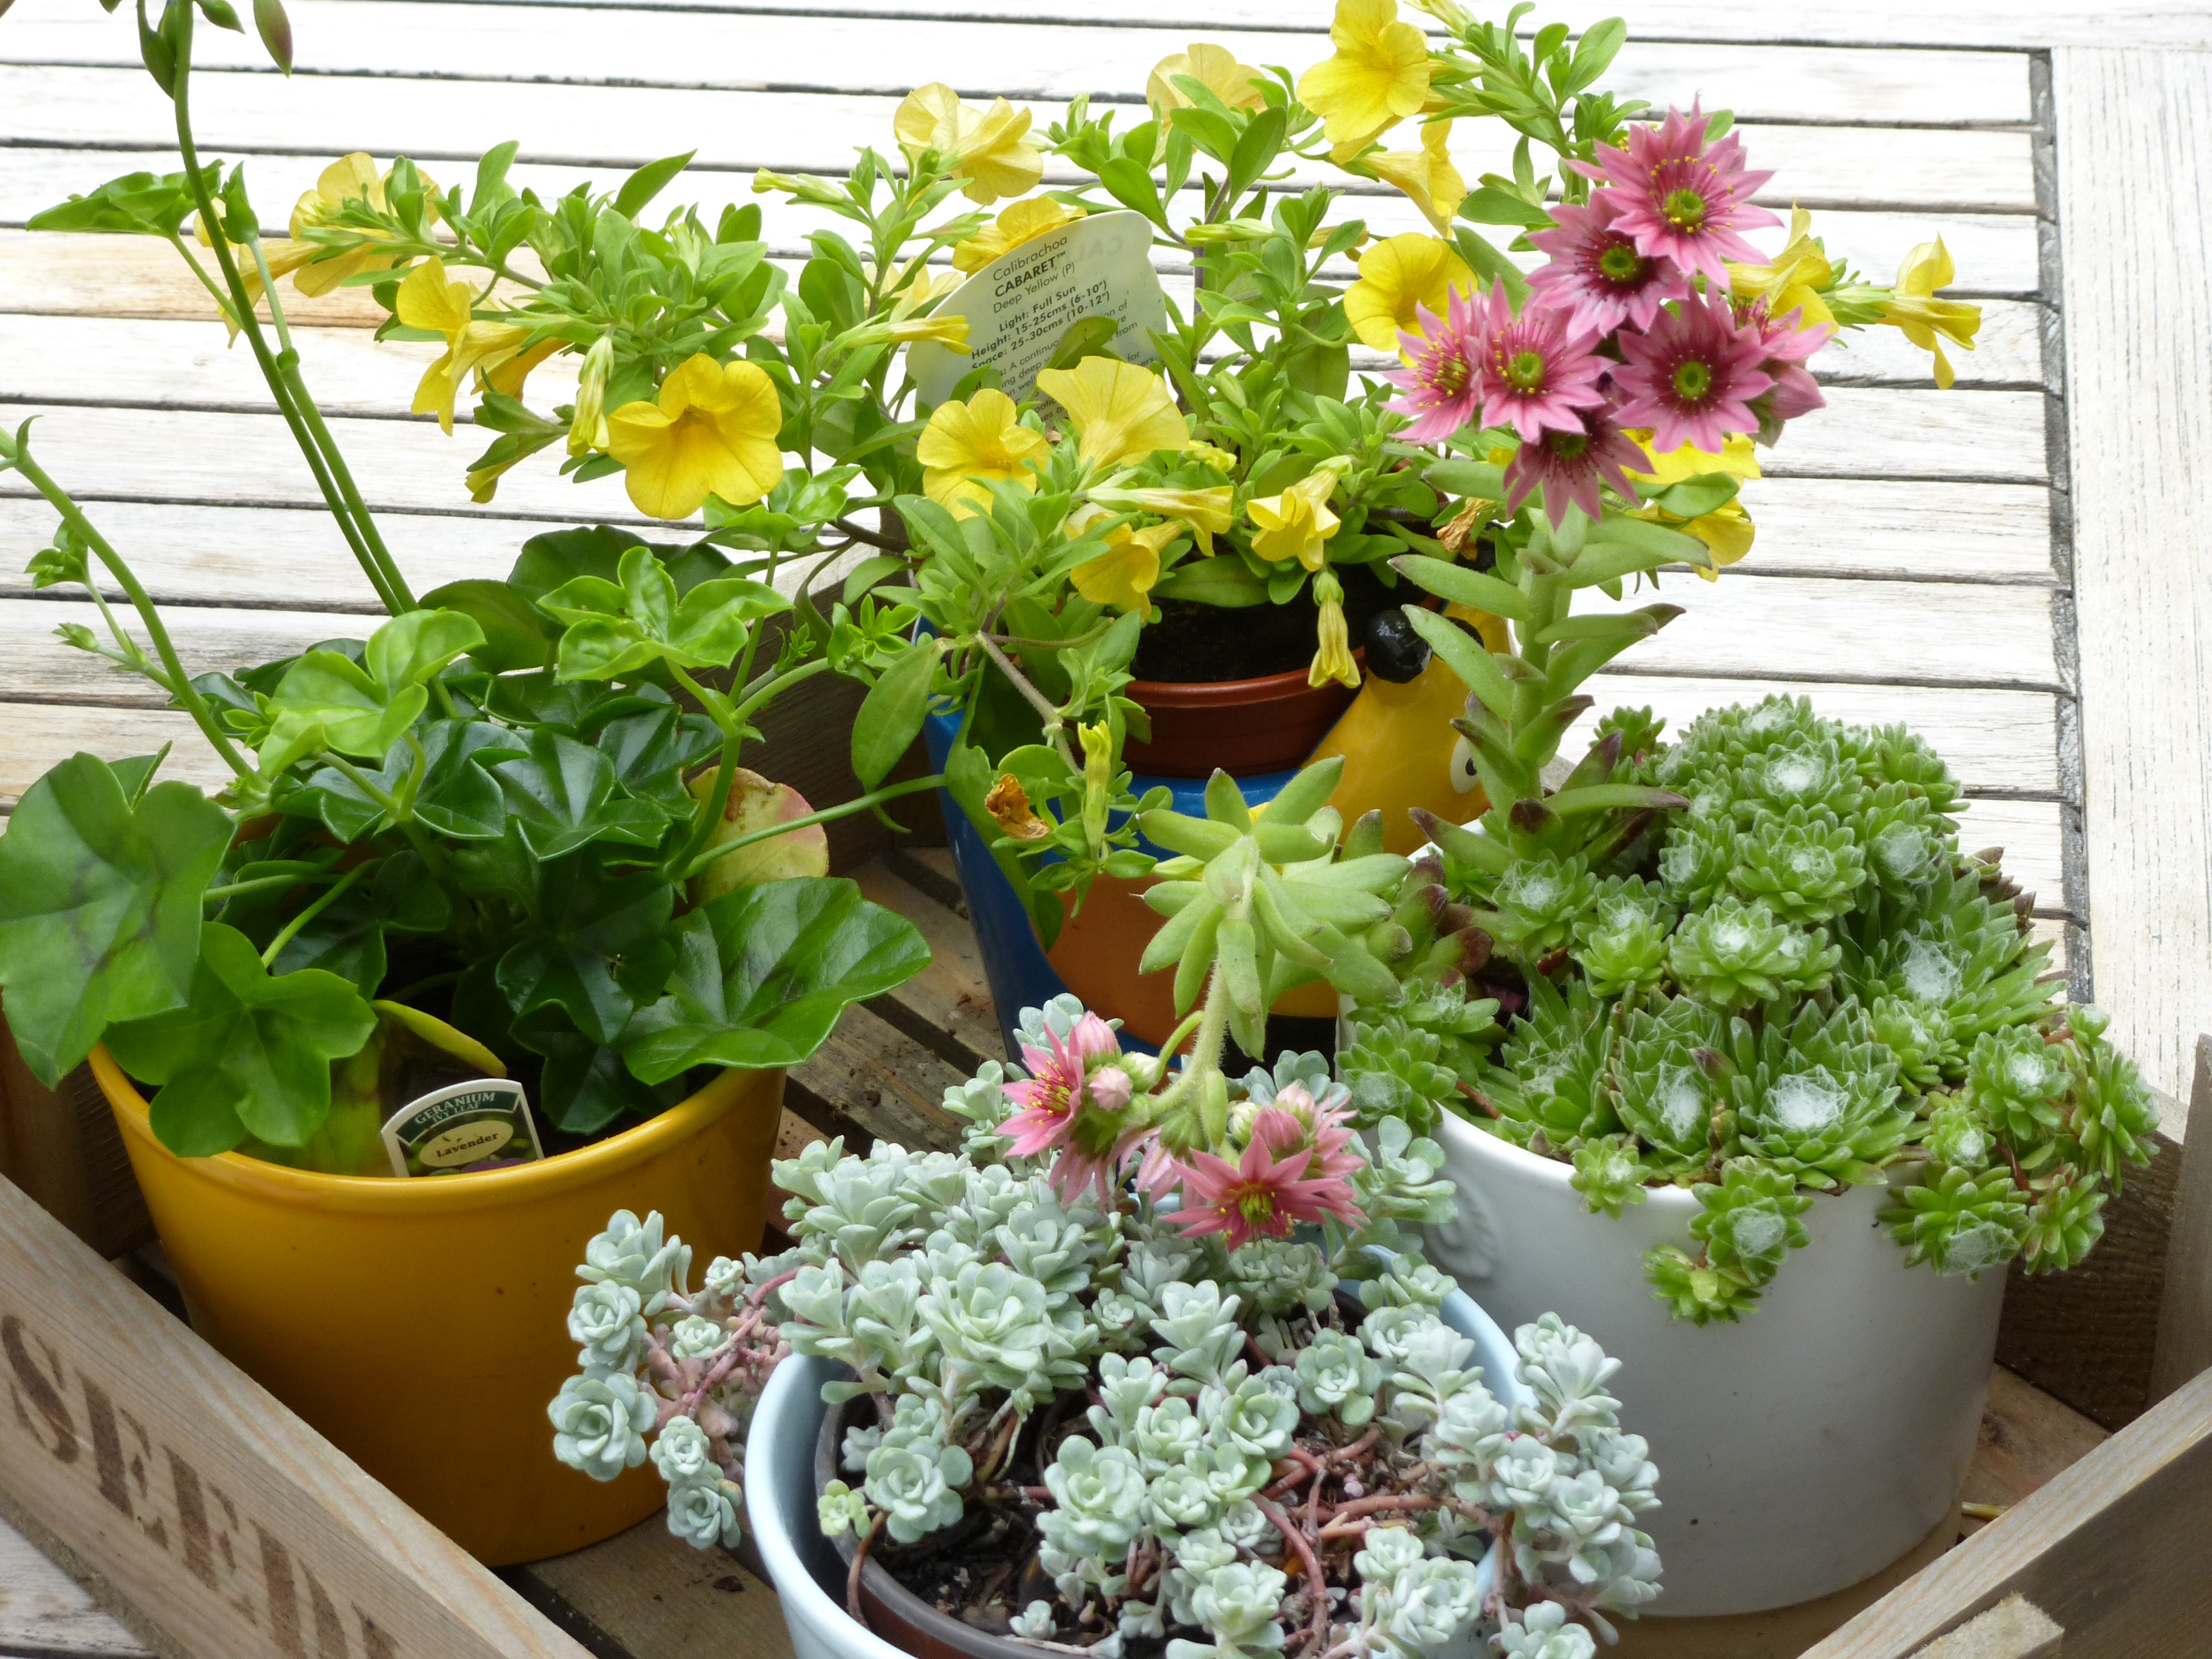 Small wooden crate filled with assorted pot plants